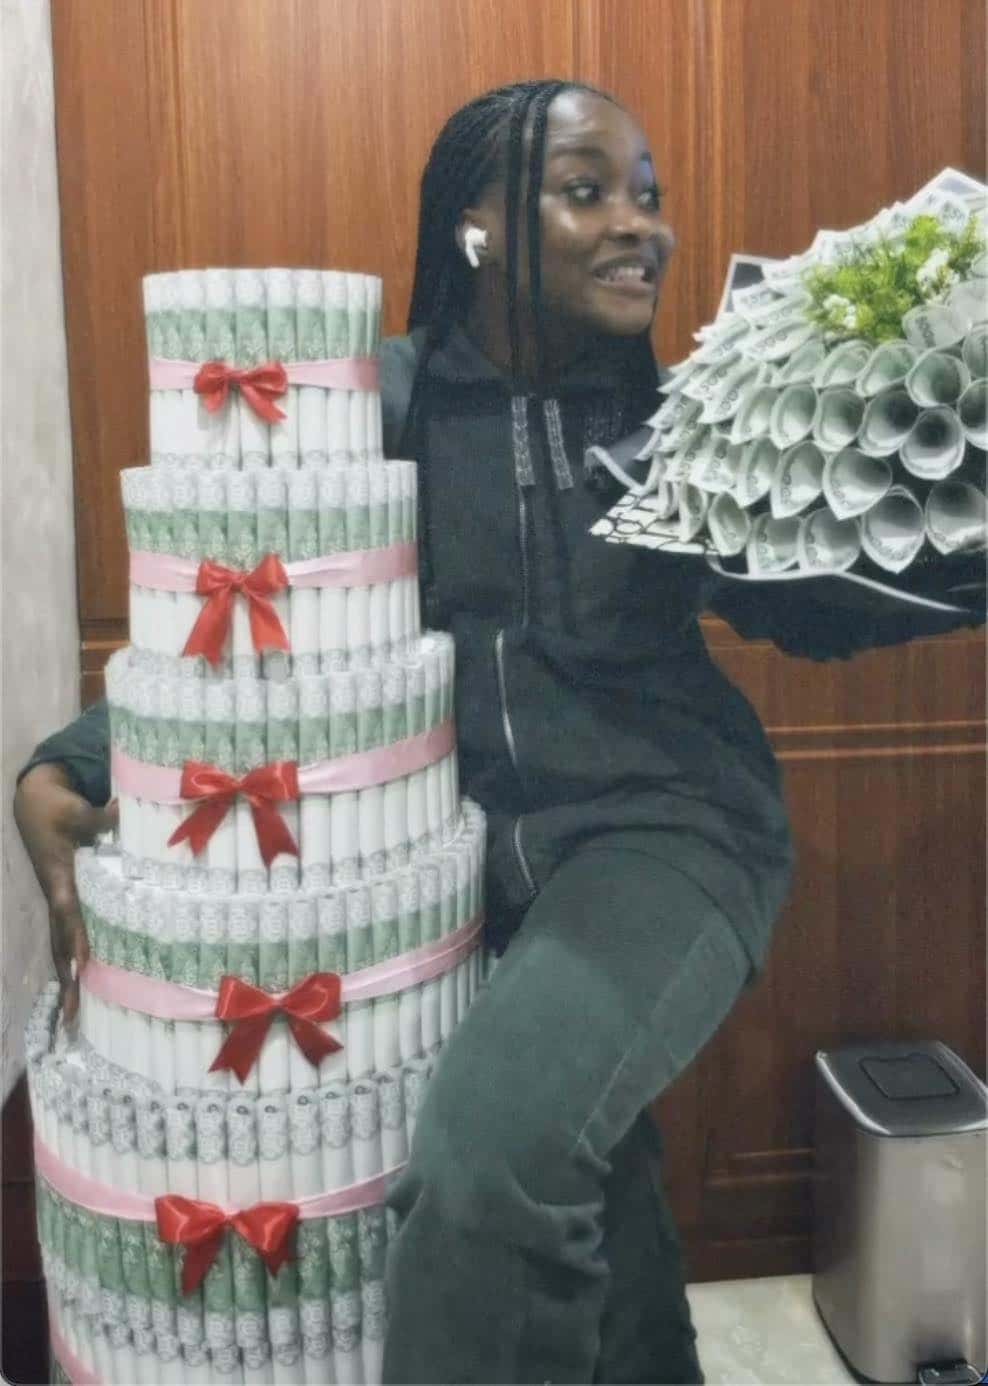 “If e easy to be winner, try am" - Ilebaye says, flaunts money cake and bouquet 